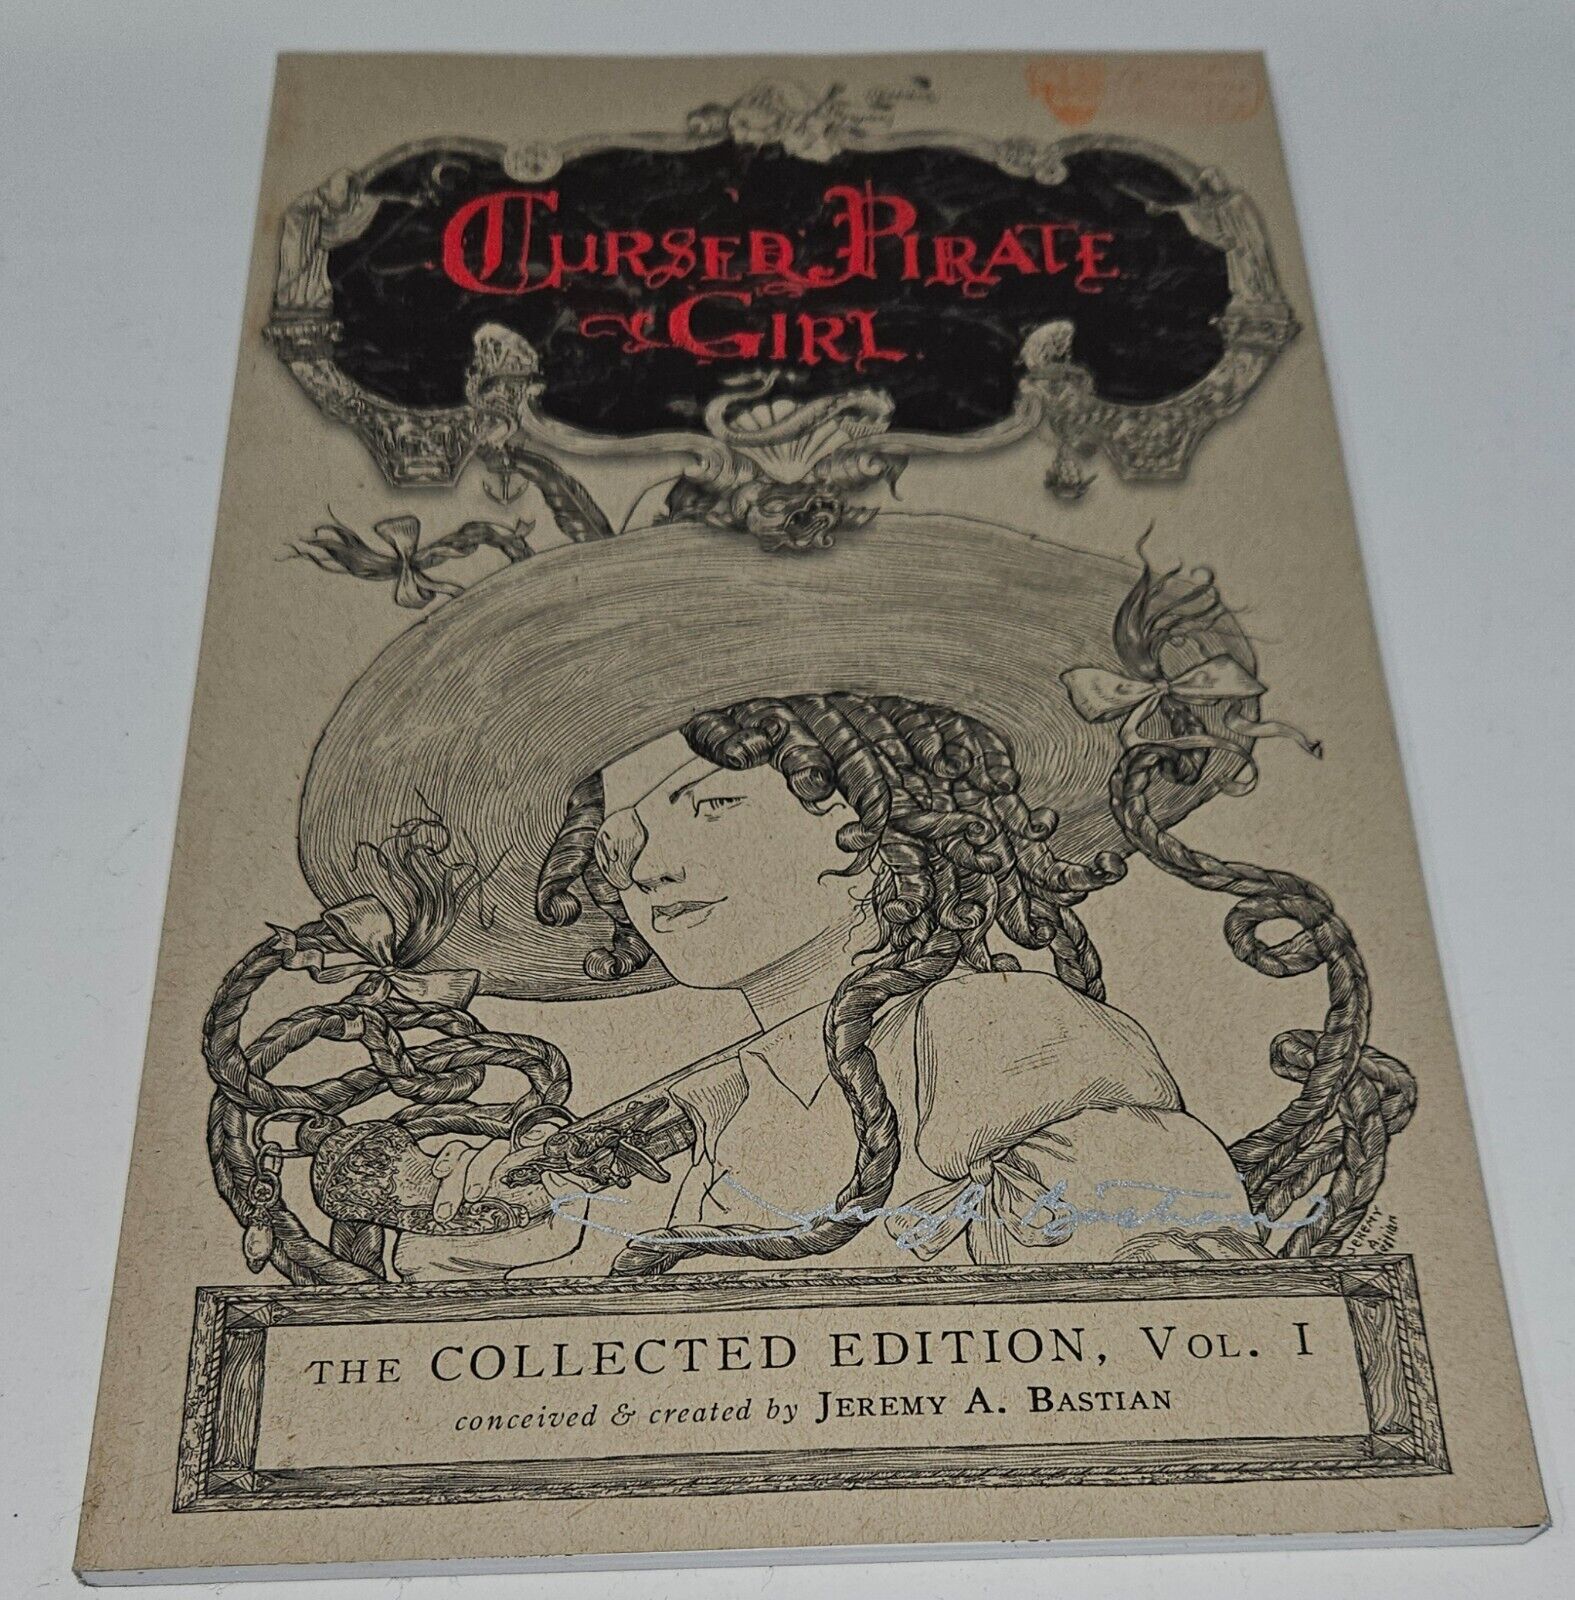 Cursed Pirate Girl: The Collected Edition, Vol. 1 - Signed by Jeremy Bastian